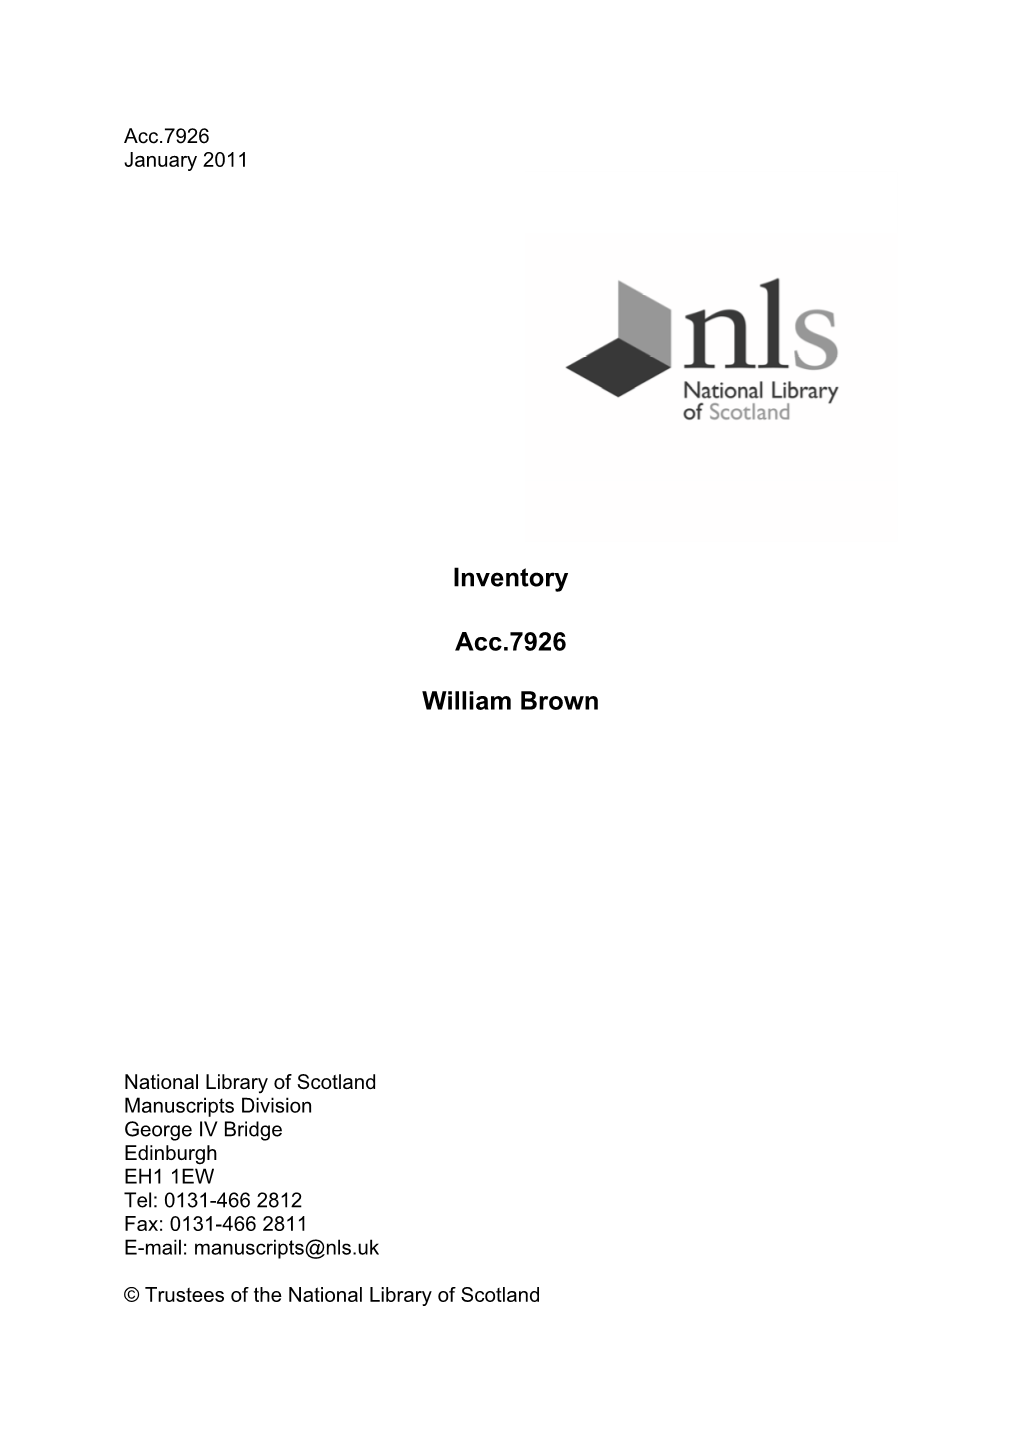 Inventory Acc.7926 William Brown